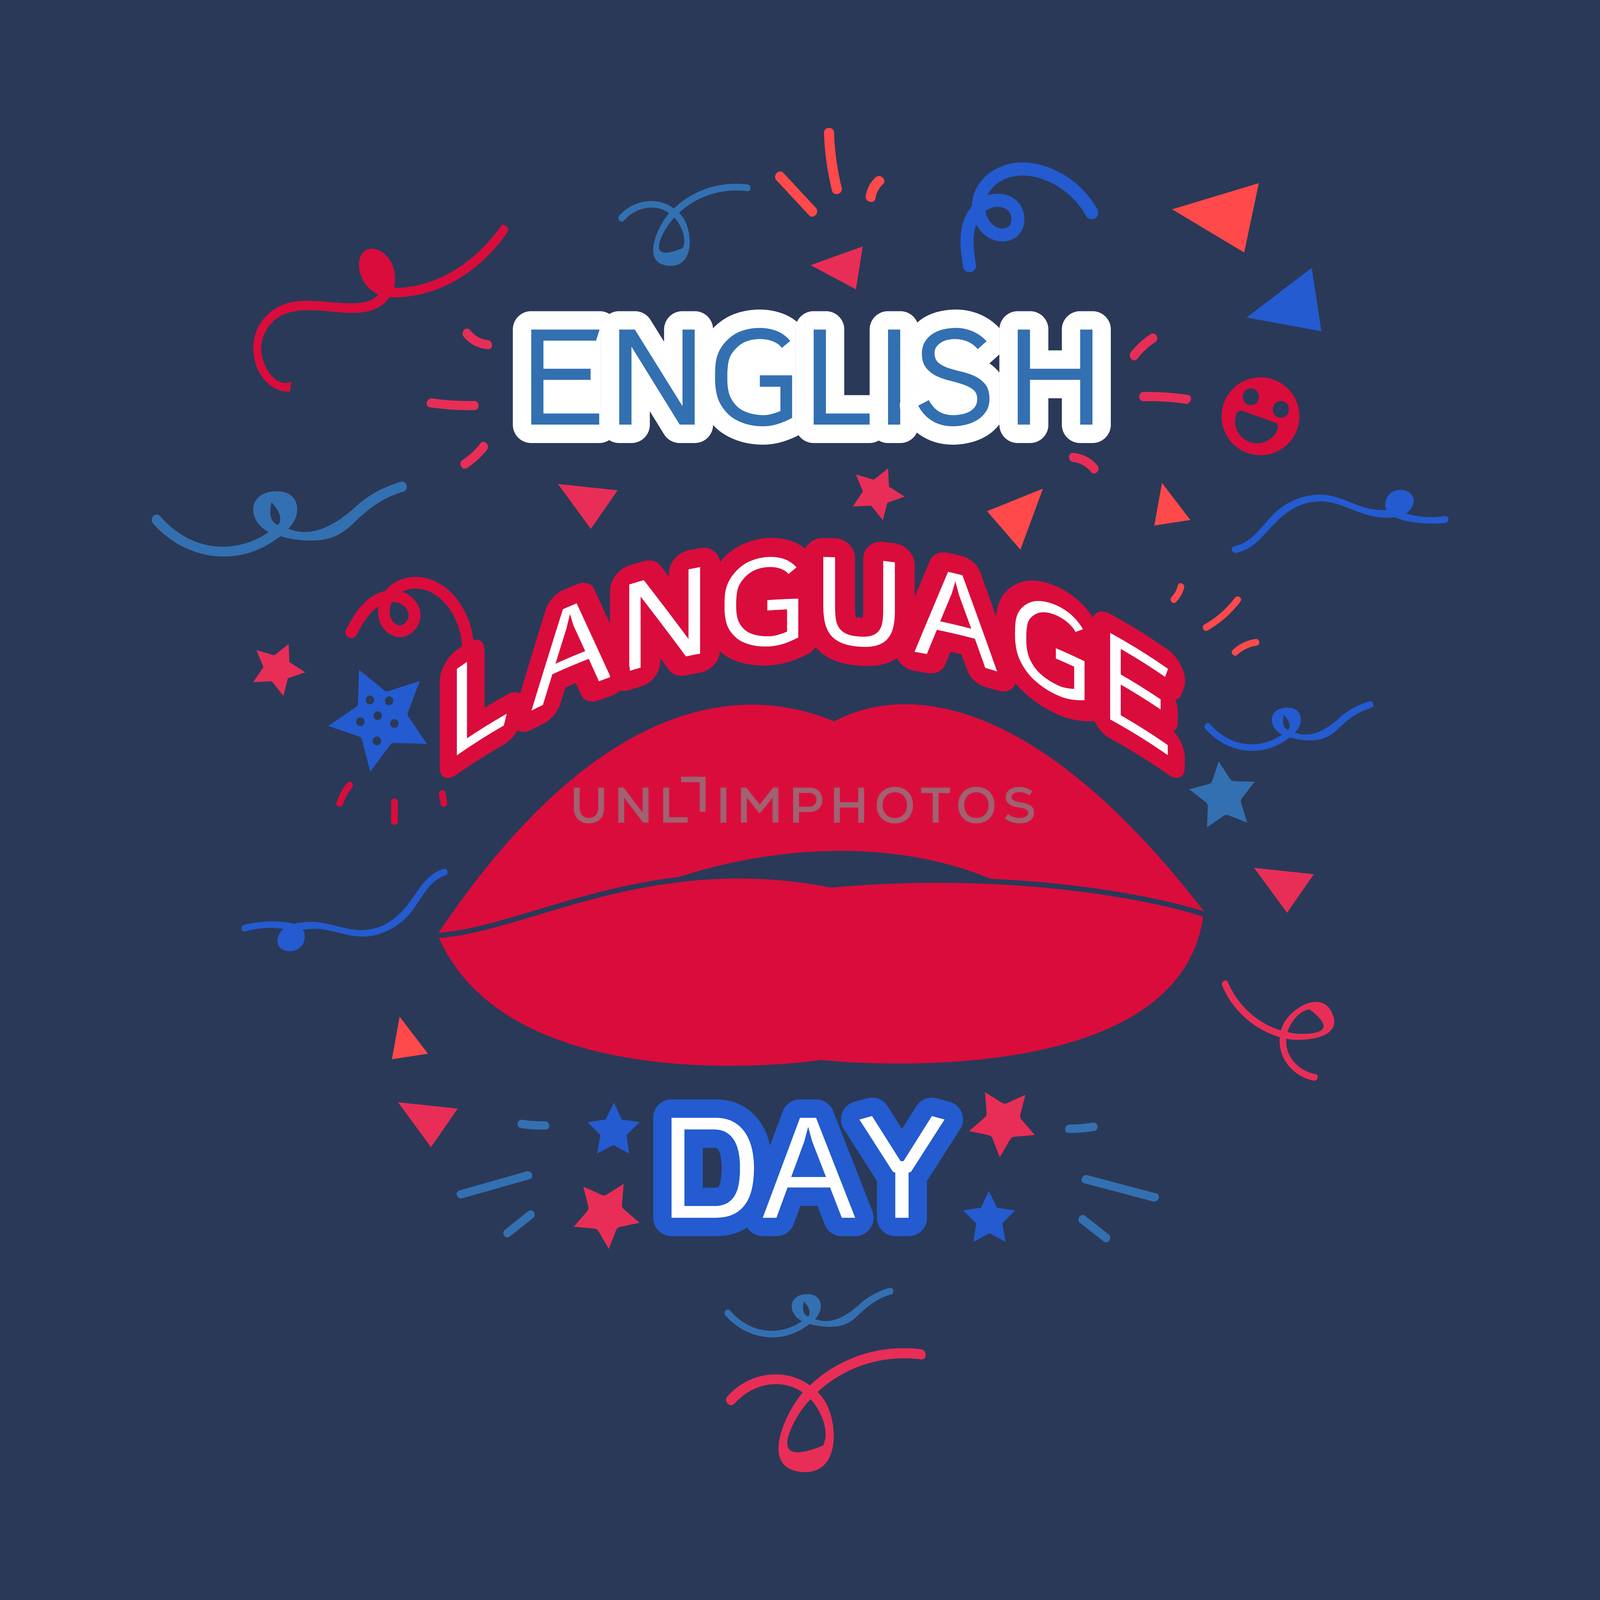 English Language Day Banner With Lips. Vector